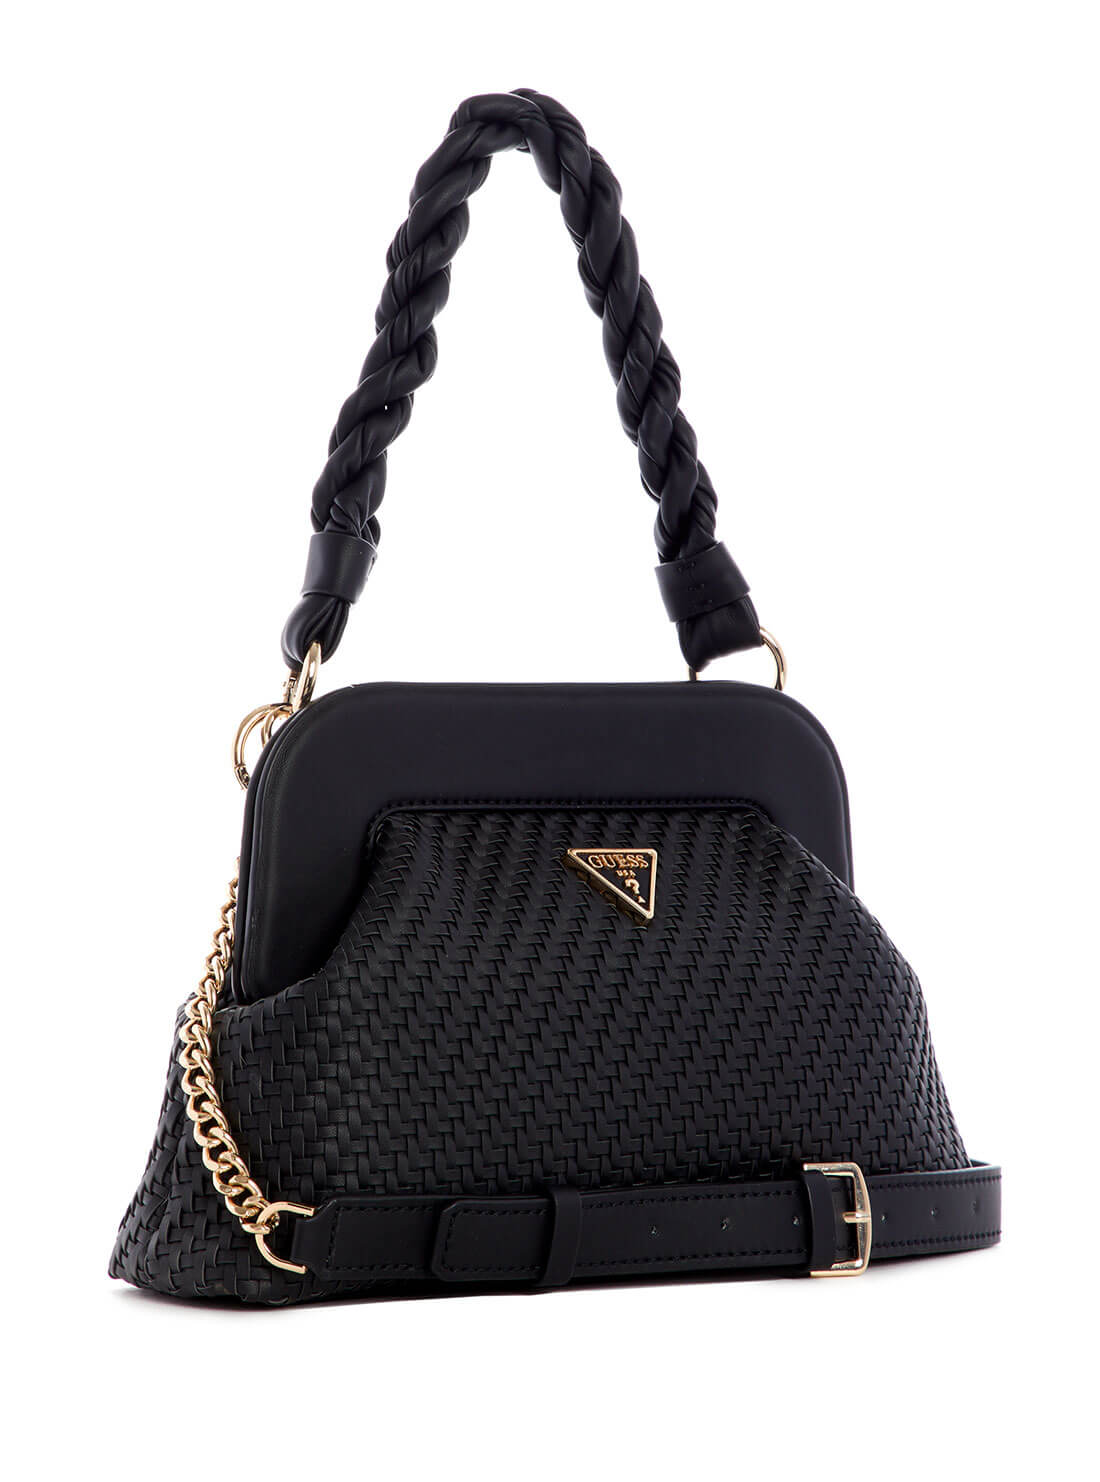 GUESS Women's Black Woven Hassie Frame Crossbody Bag VG839717 Side View